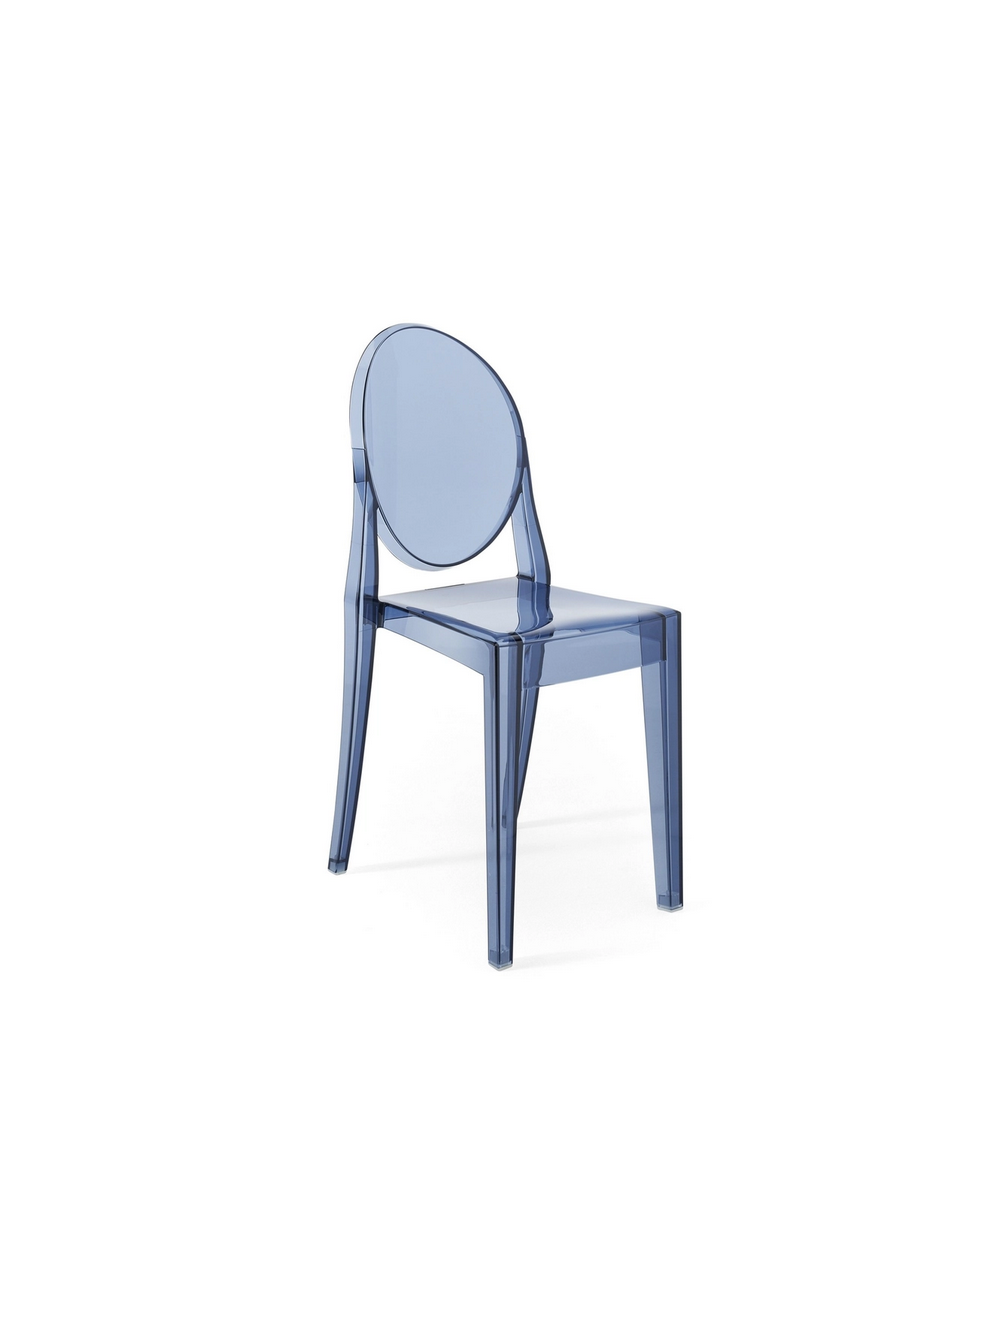 Victoria Ghost Polycarbonate Chair by Kartell Online Shop ®